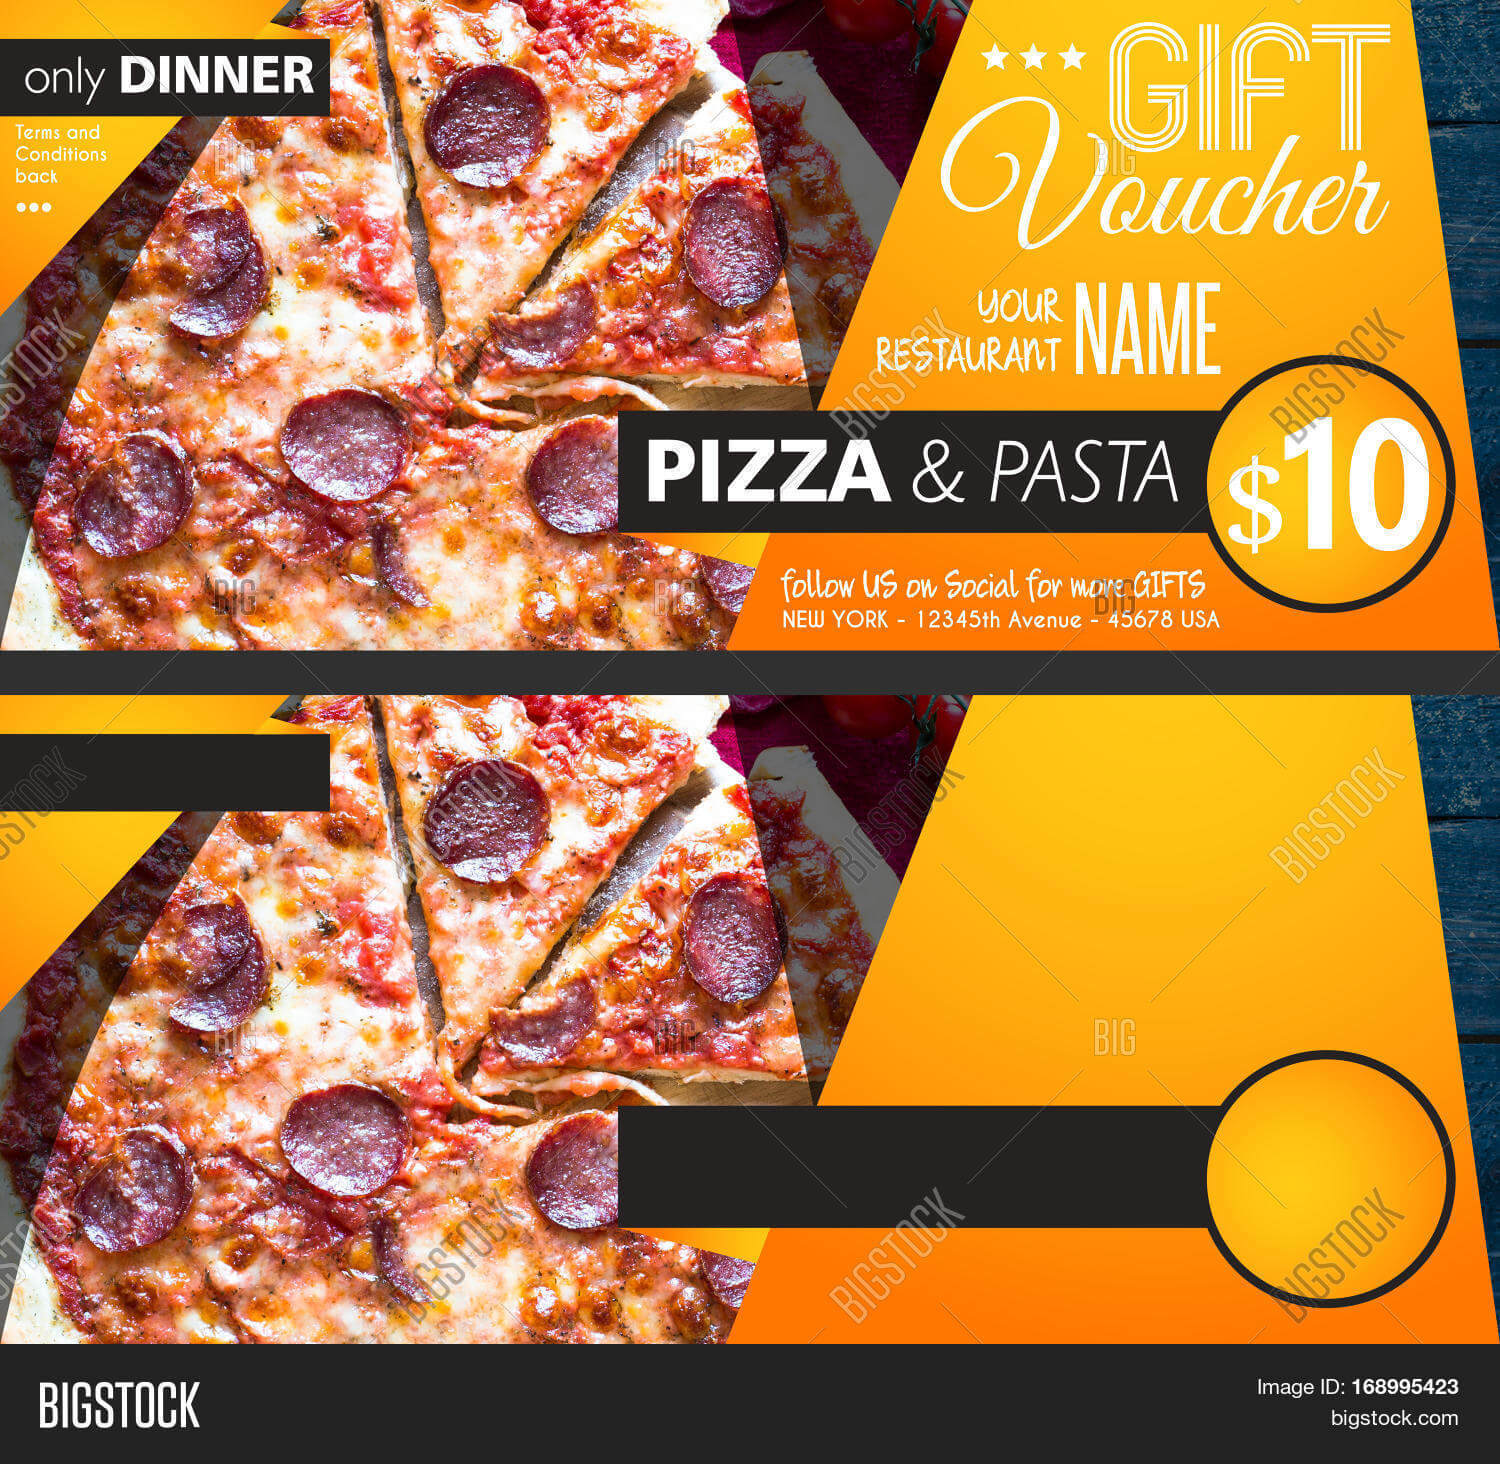 Restaurant Gift Image & Photo (Free Trial) | Bigstock Inside Pizza Gift Certificate Template